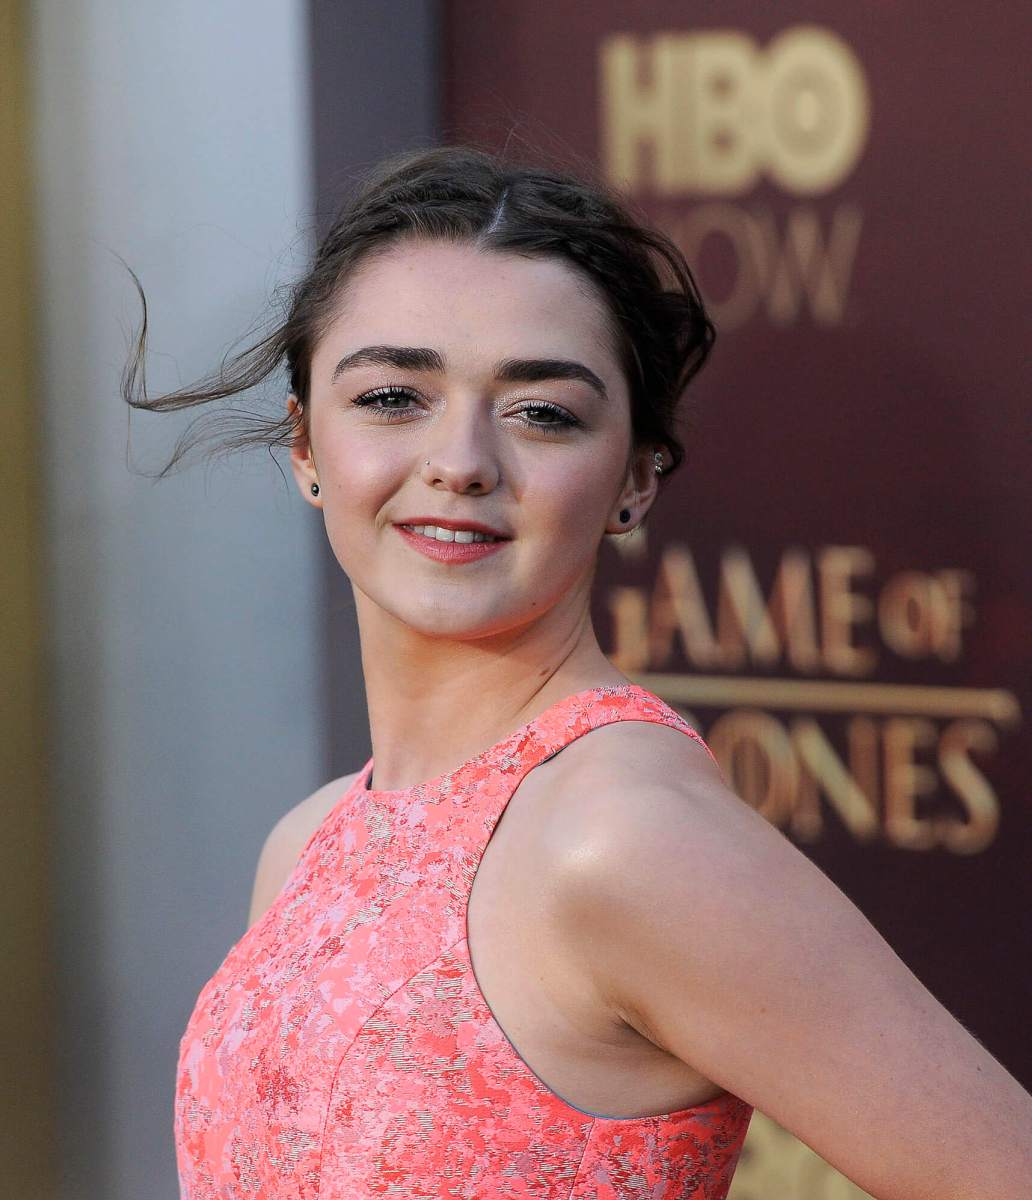 Maisie Williams says adults ‘don’t know s–t’